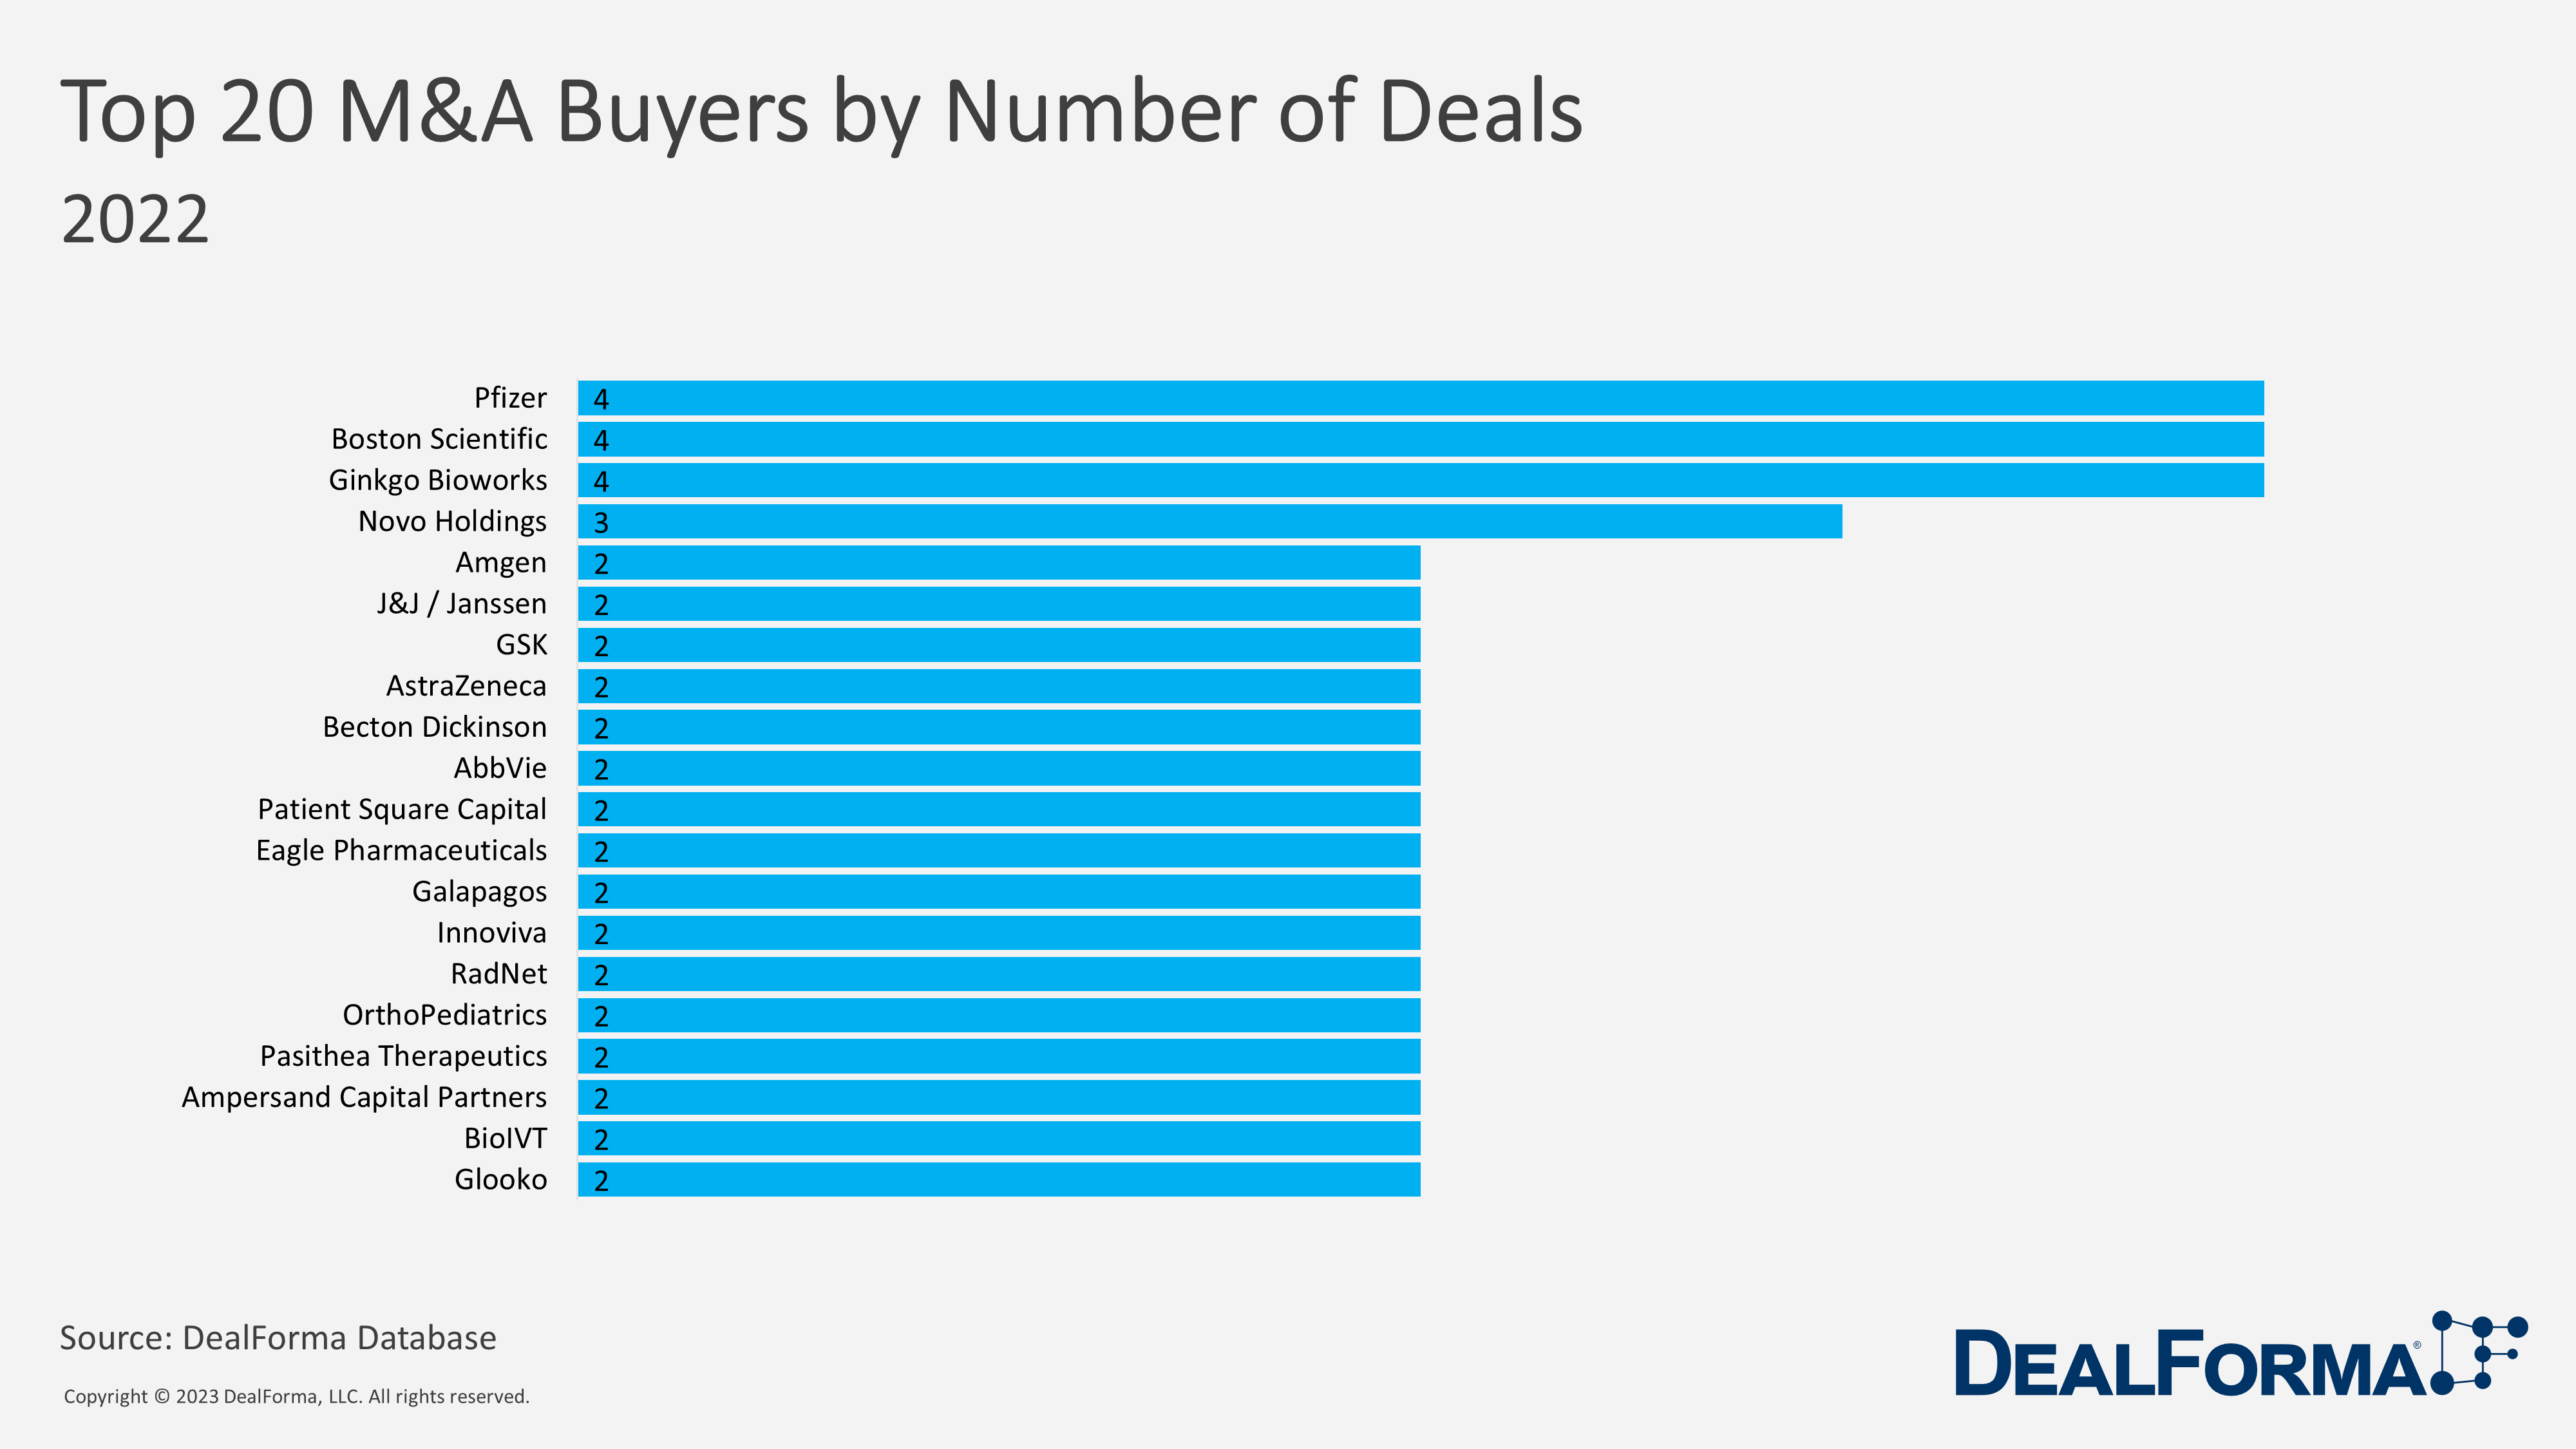 Top 20 M&A Buyers by Number of Deals